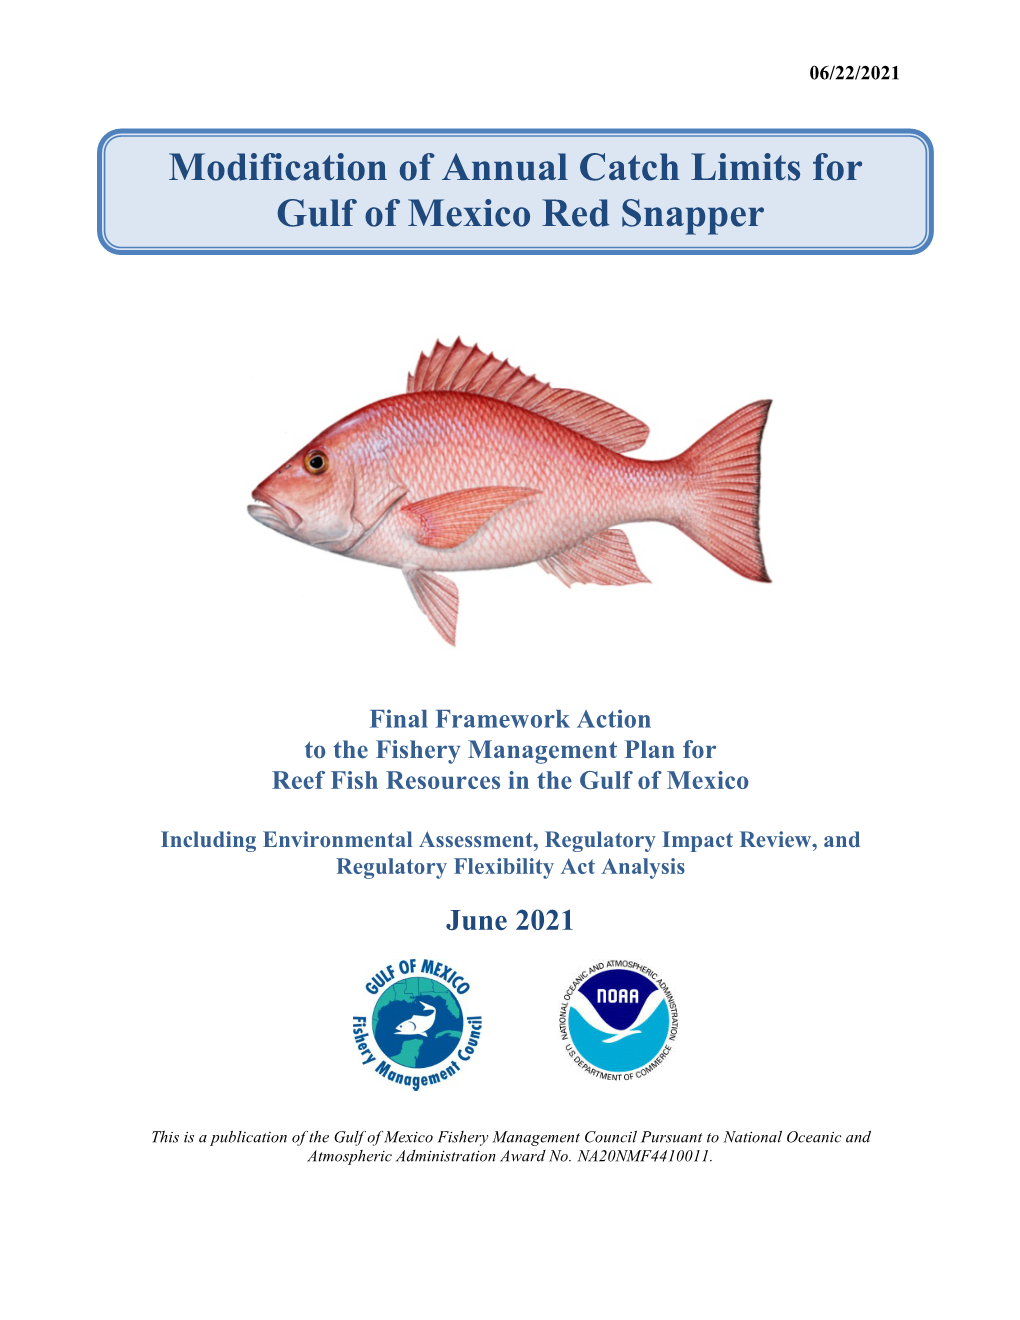 Modification of Annual Catch Limits for Gulf of Mexico Red Snapper